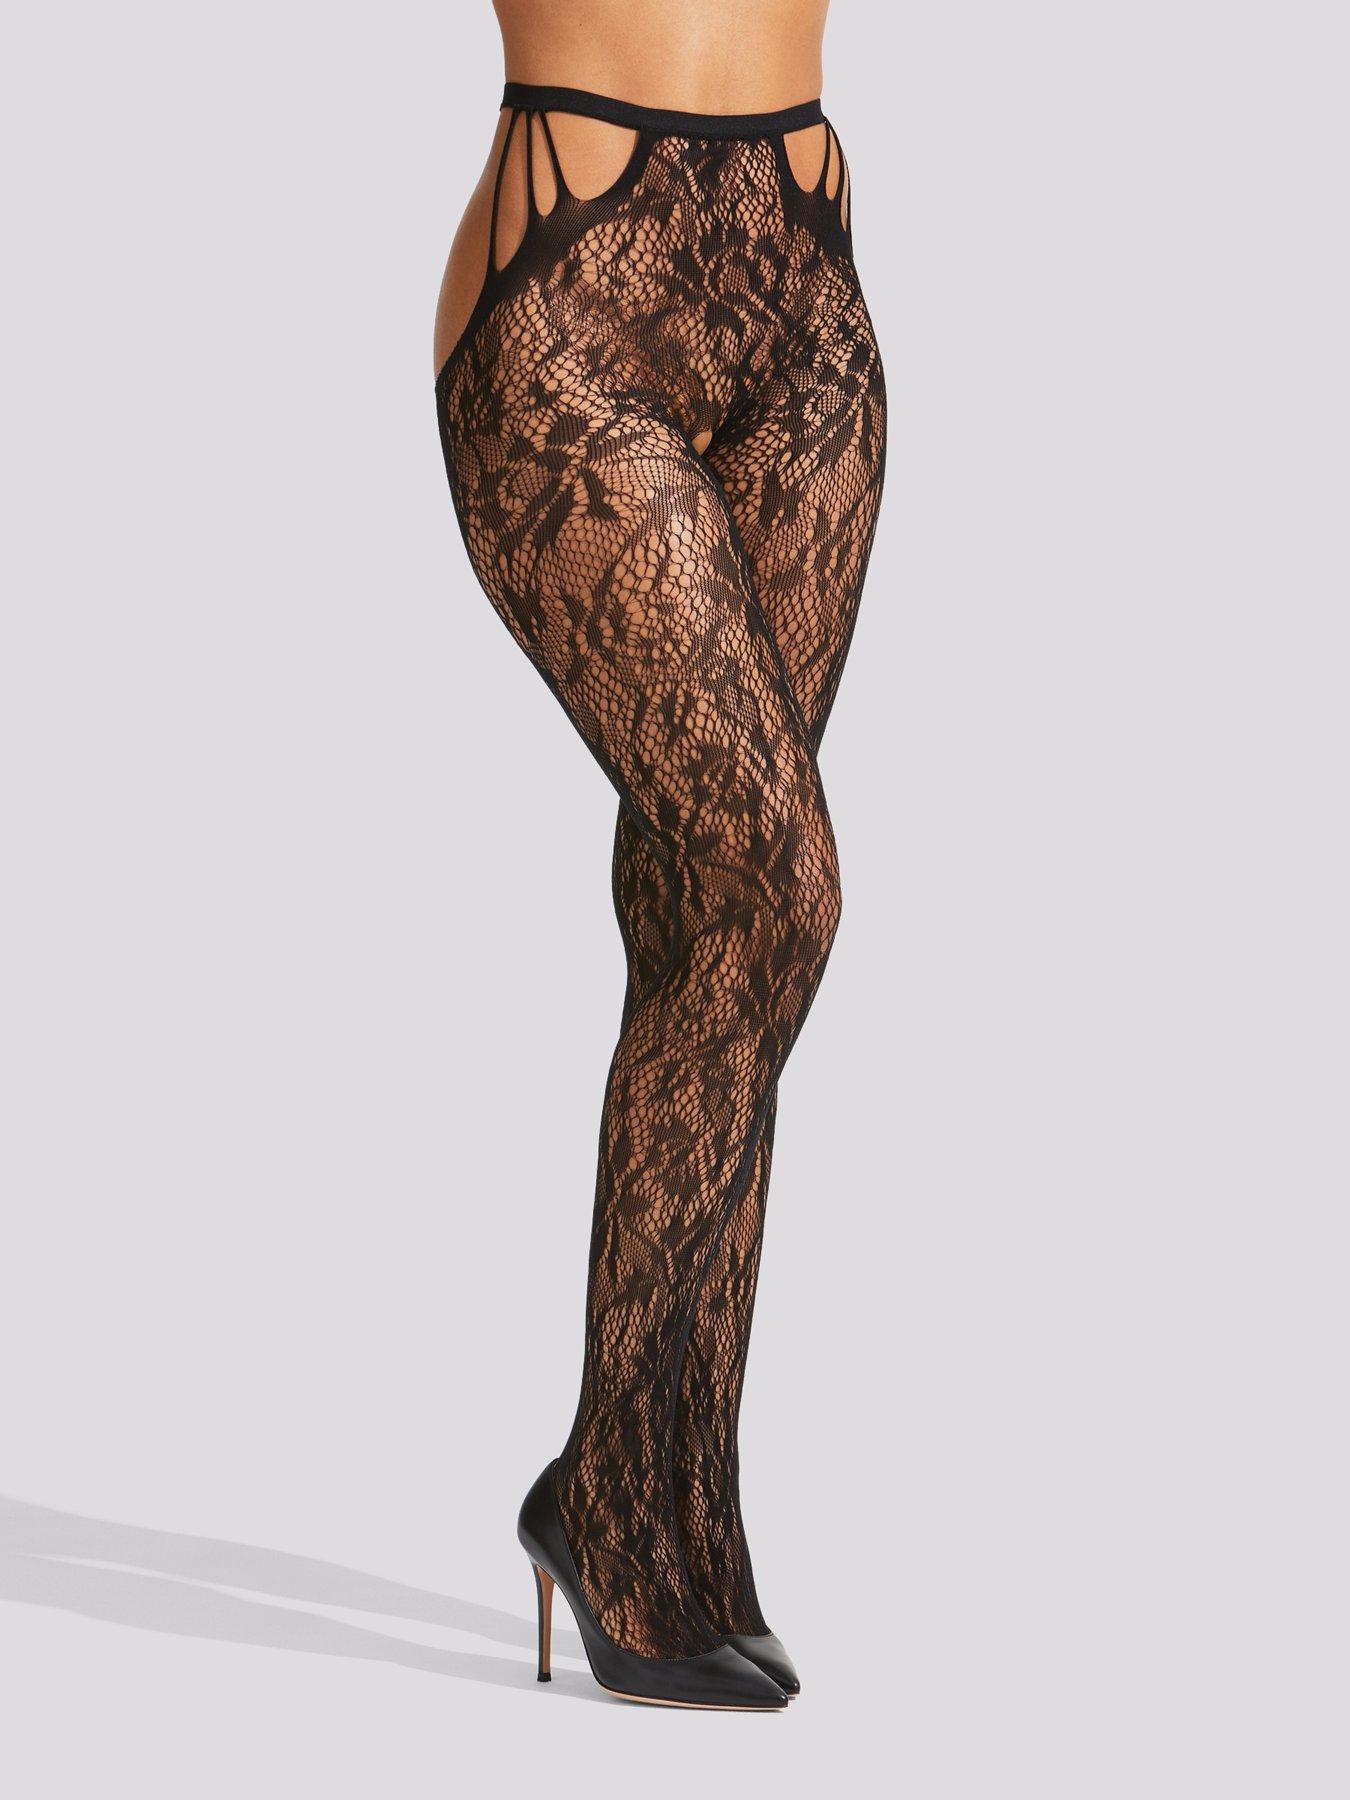 Lovehoney Lingerie Women's Sheer Floral Lace Stockings - Stretchy Nylon  Thigh Highs - Regular to Plus Sizes: 4-18